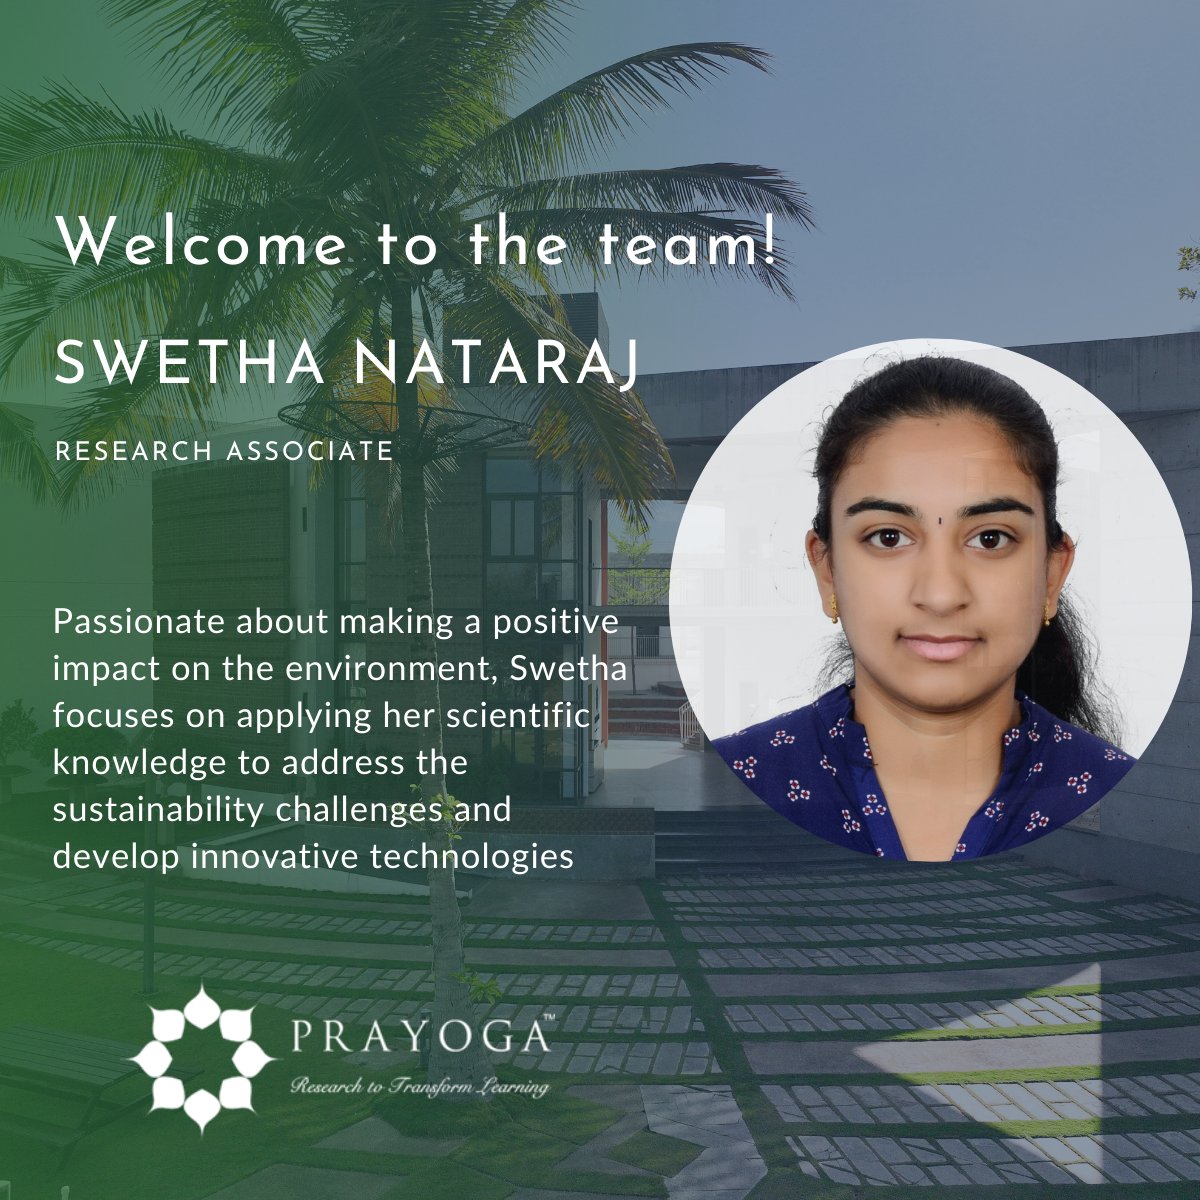 We couldn't be happier to welcome Swetha to our team! With her, our mission to reshape learning gains great momentum! #experientialeducation
#teachercommunity #onboarding
#blendedlearning
#scientificresearch
#schoolchildren
#educationresearch  #prayoga #educationresearch